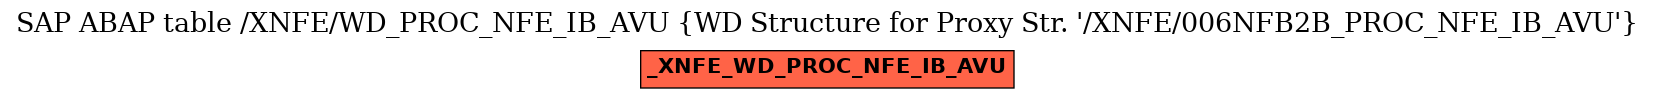 E-R Diagram for table /XNFE/WD_PROC_NFE_IB_AVU (WD Structure for Proxy Str. 